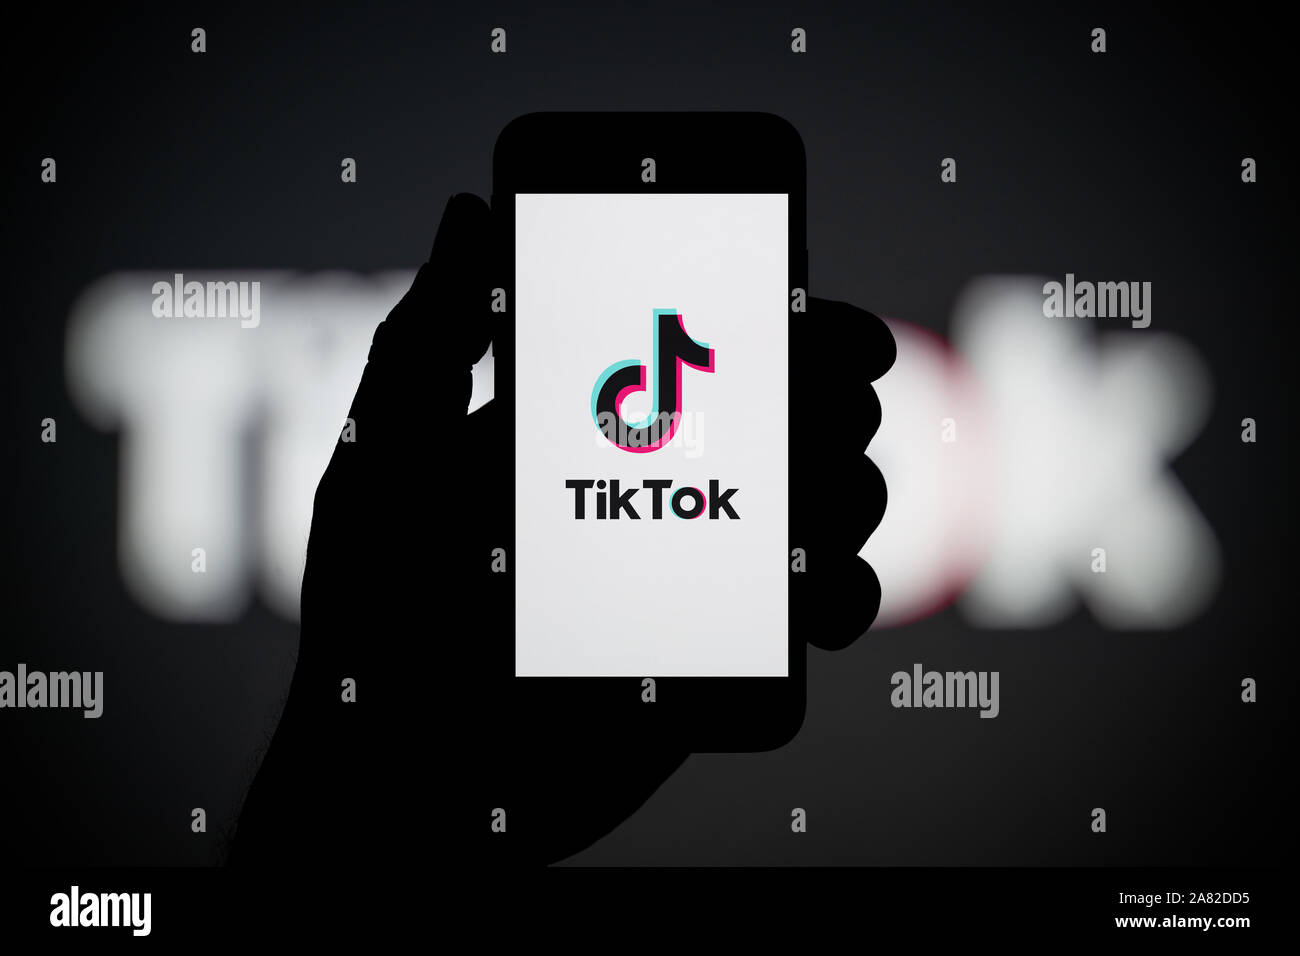 A man looks at his iPhone which displays the TikTok logo, with the same logo in the background (Editorial use only). Stock Photo